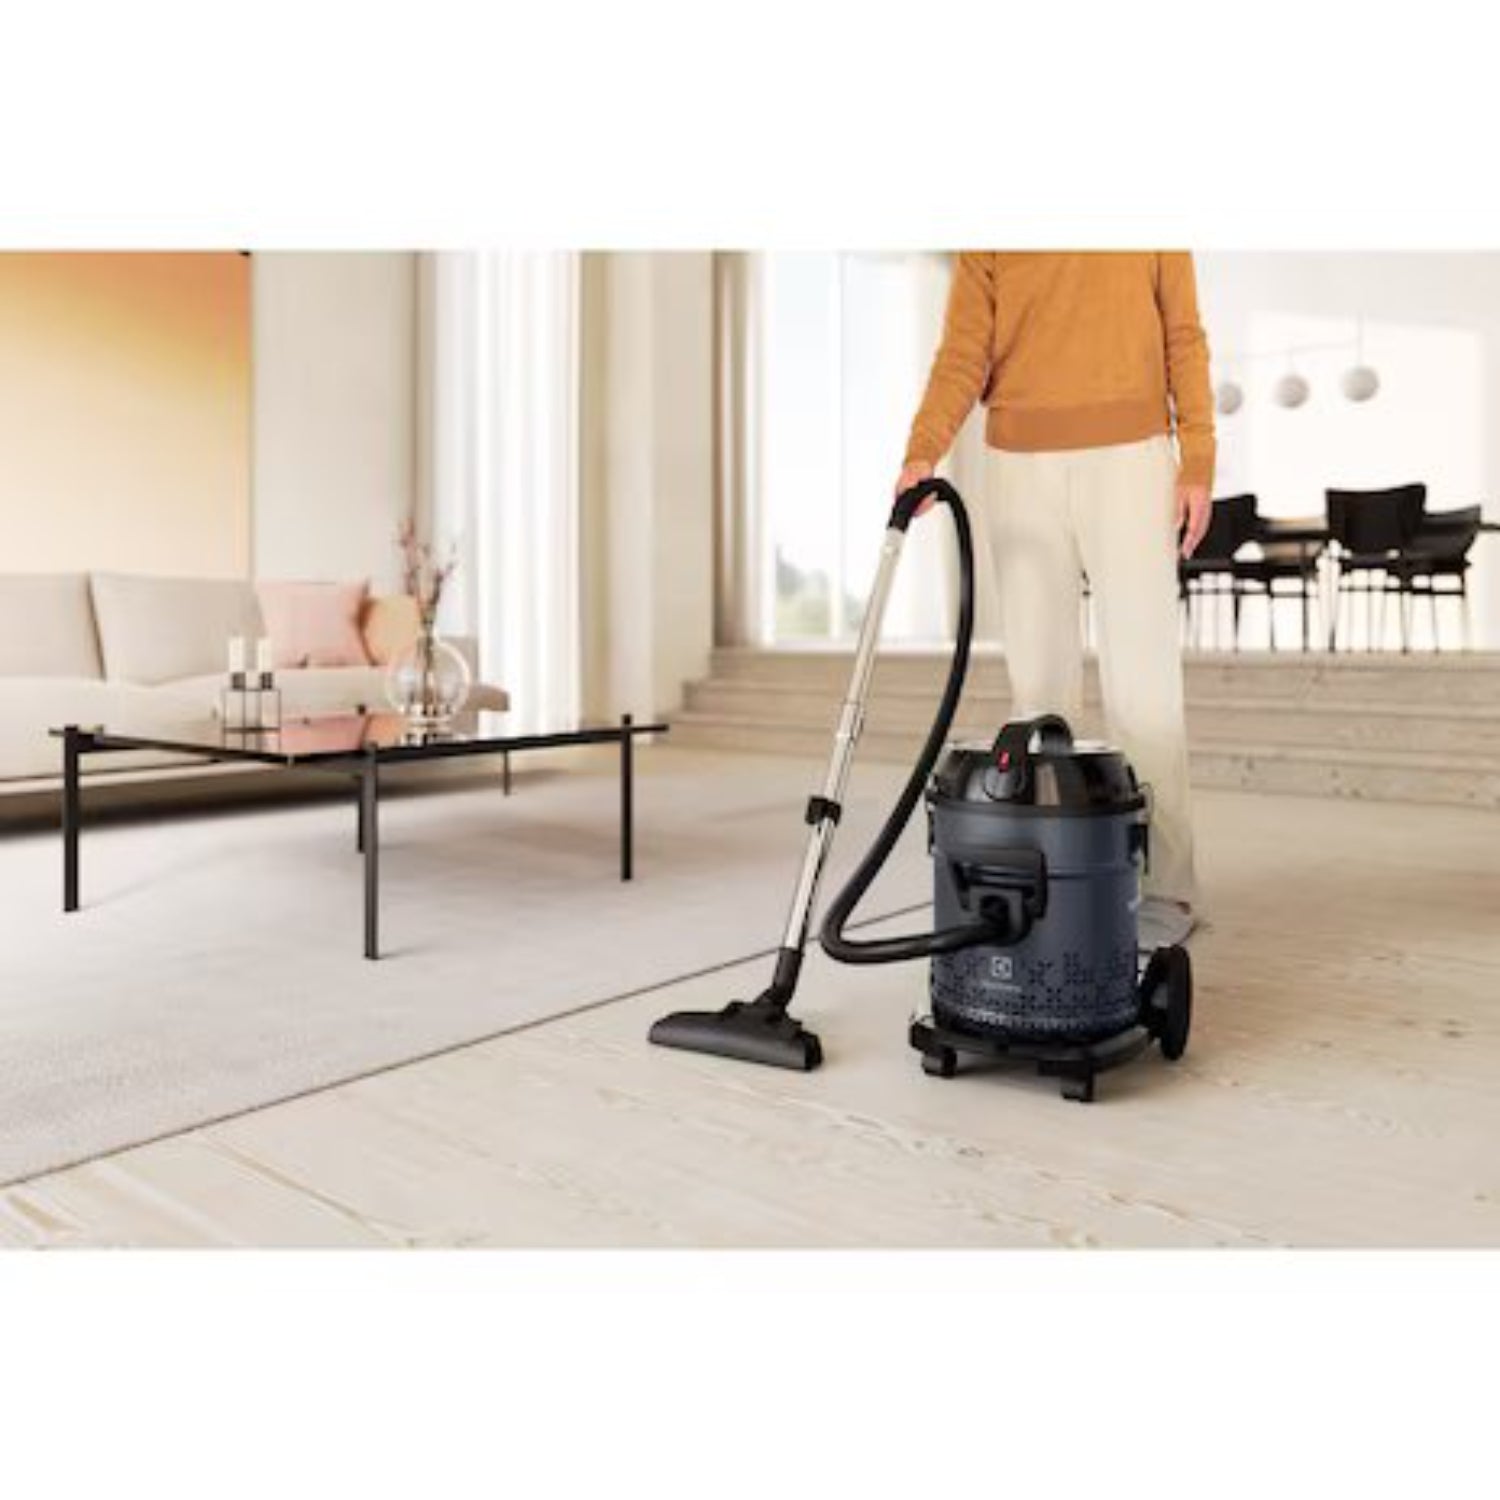 Electrolux Vacuum Cleaner with 18L Dust Bin Capacity